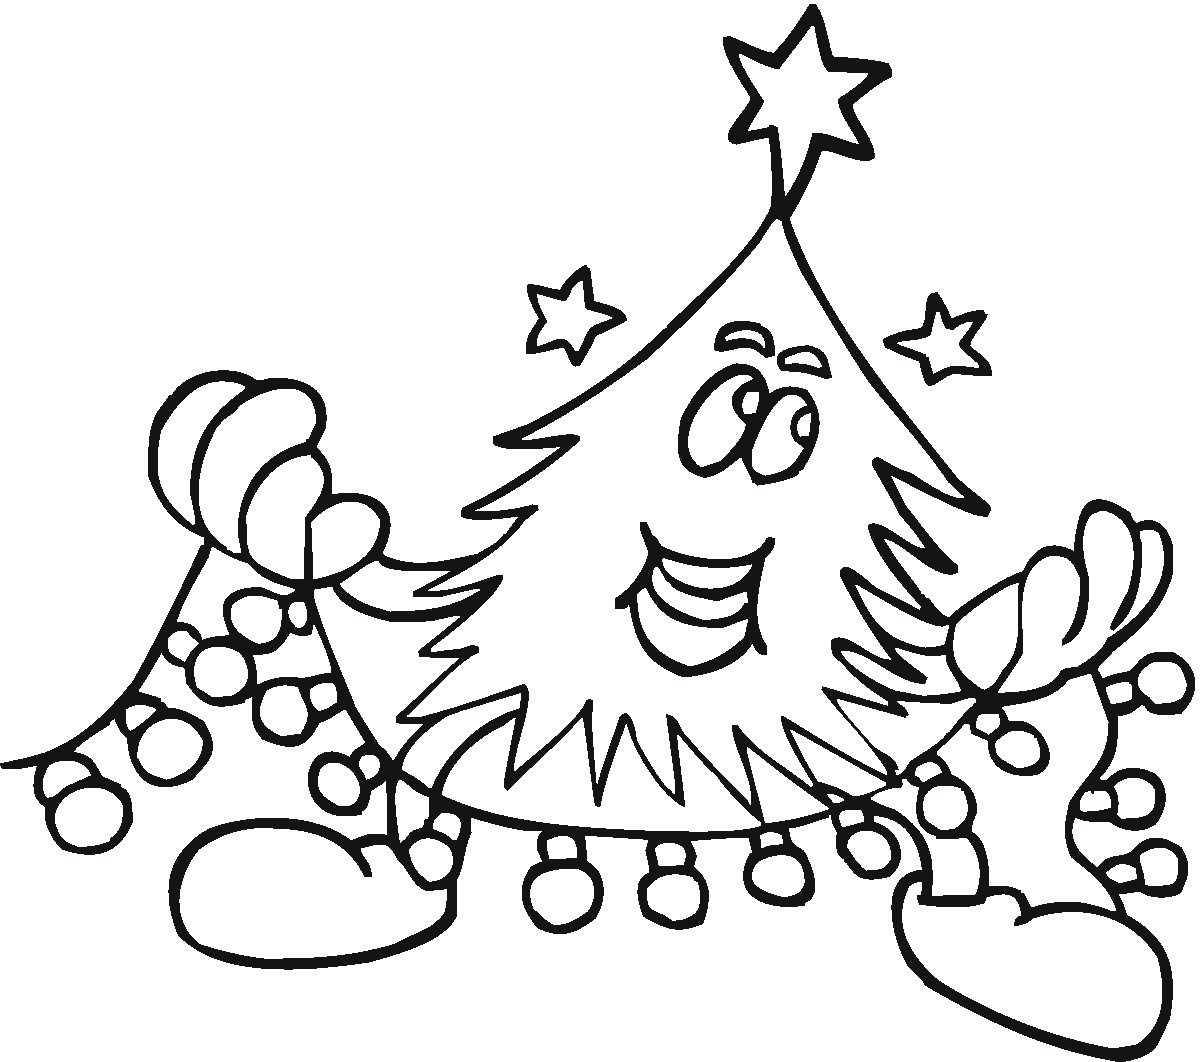 Coloring Pages For Christmas Free Printable
 Christmas Tree Coloring Pages